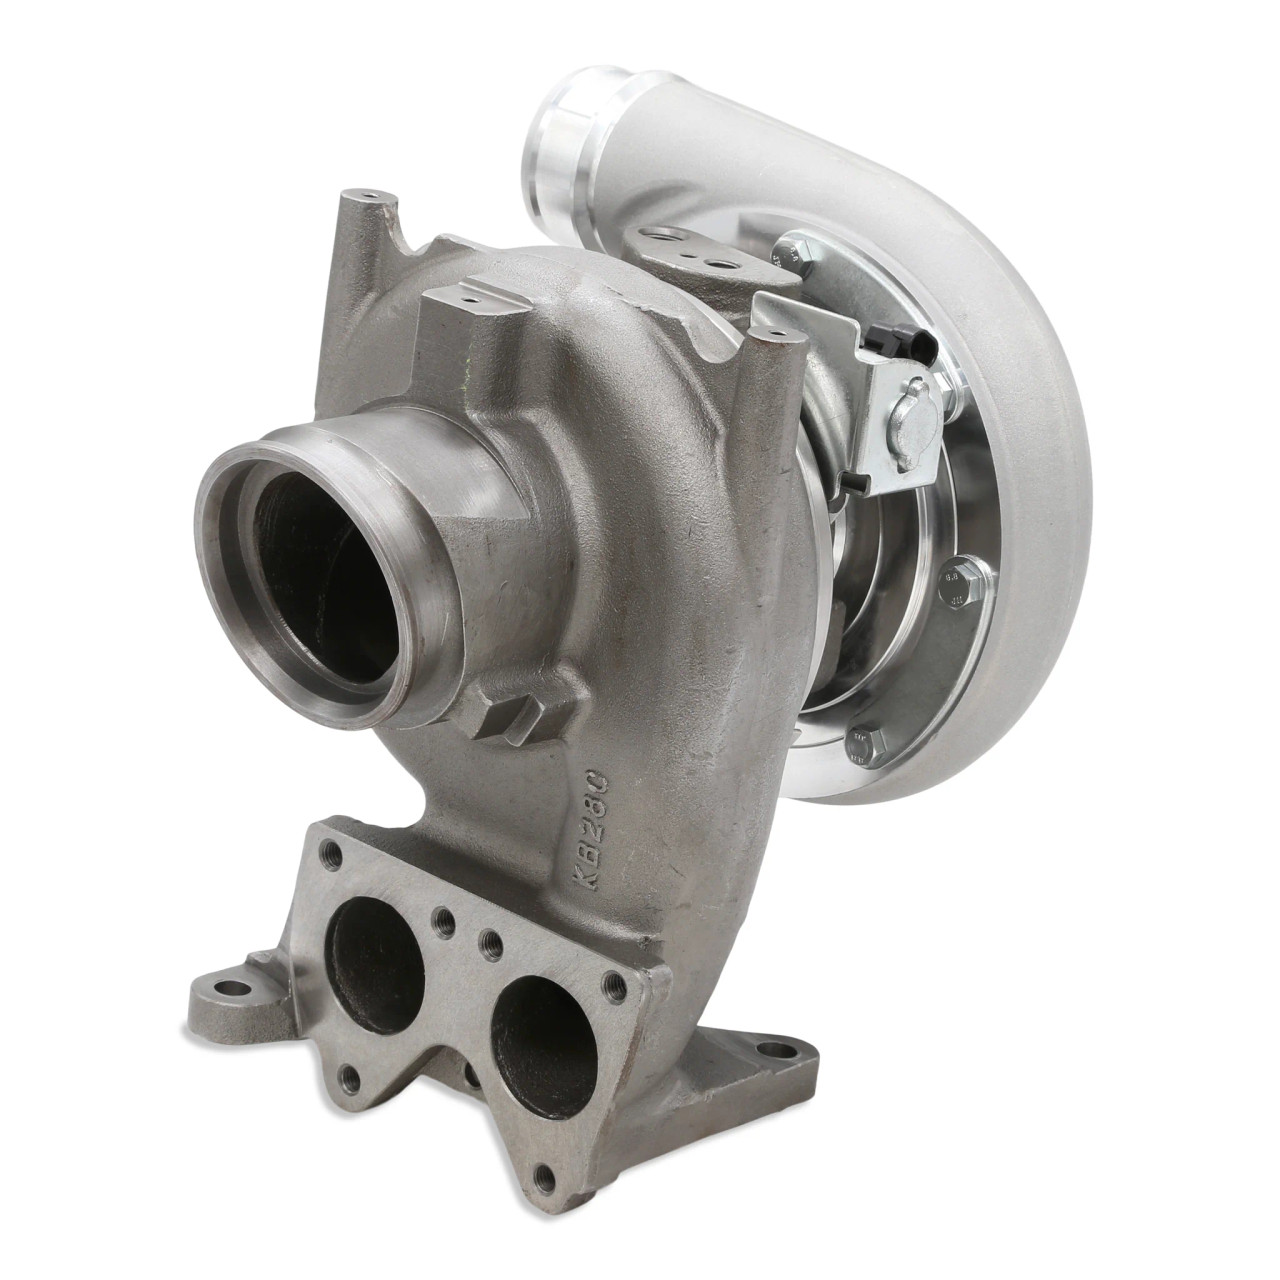 Smeding Diesel VGT for 2011 to 2016 6.6L Duramax (SDLMLVGT) Other View